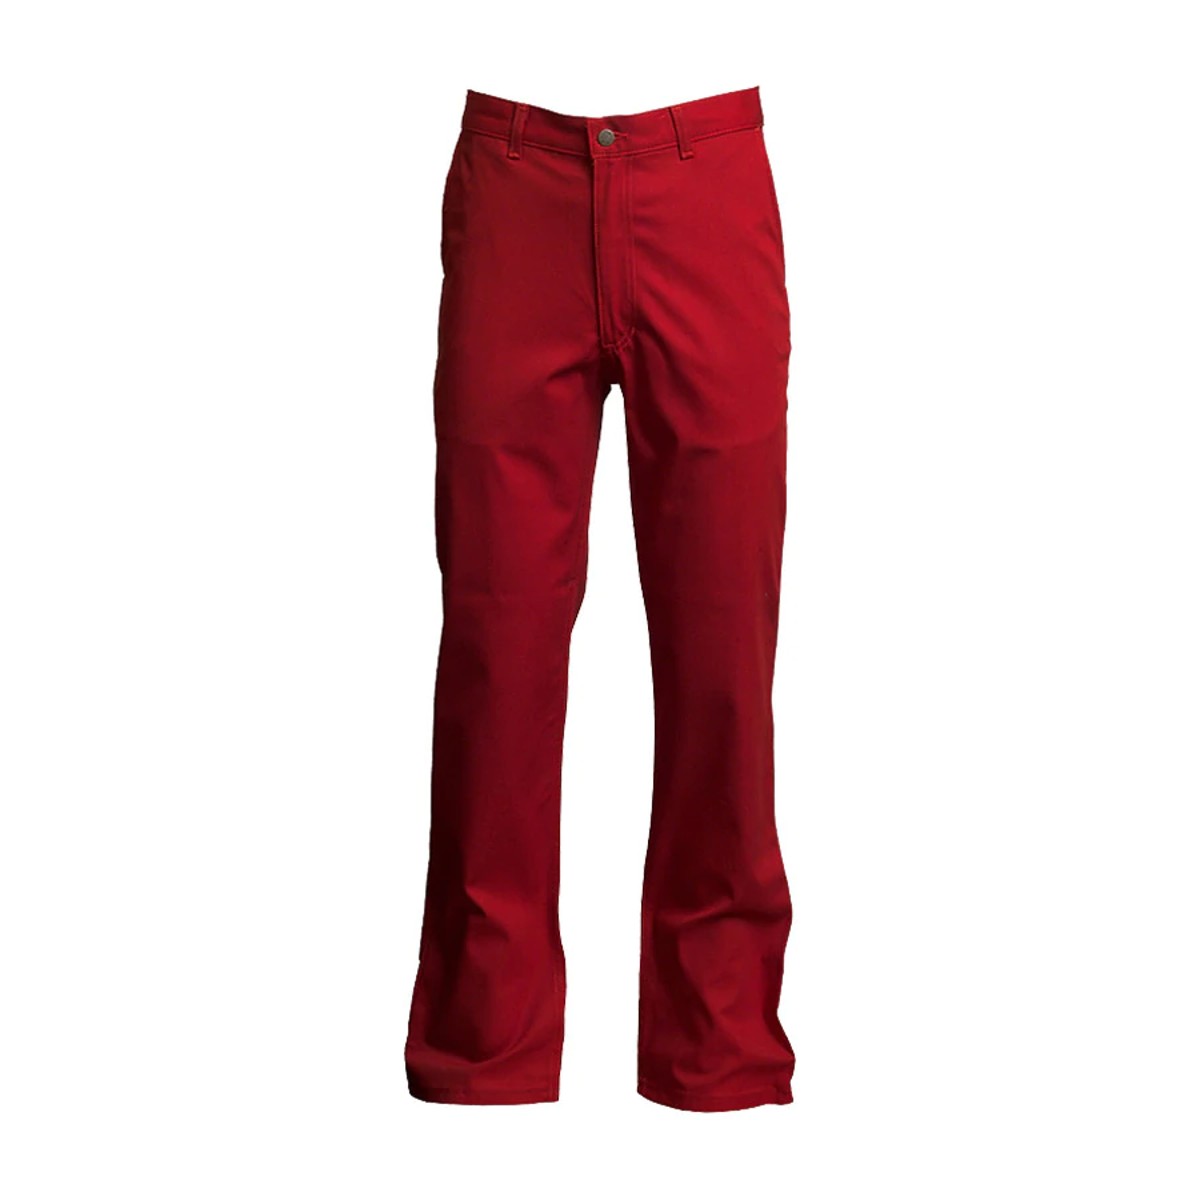 LAPCO Cotton FR Work Pants in Red